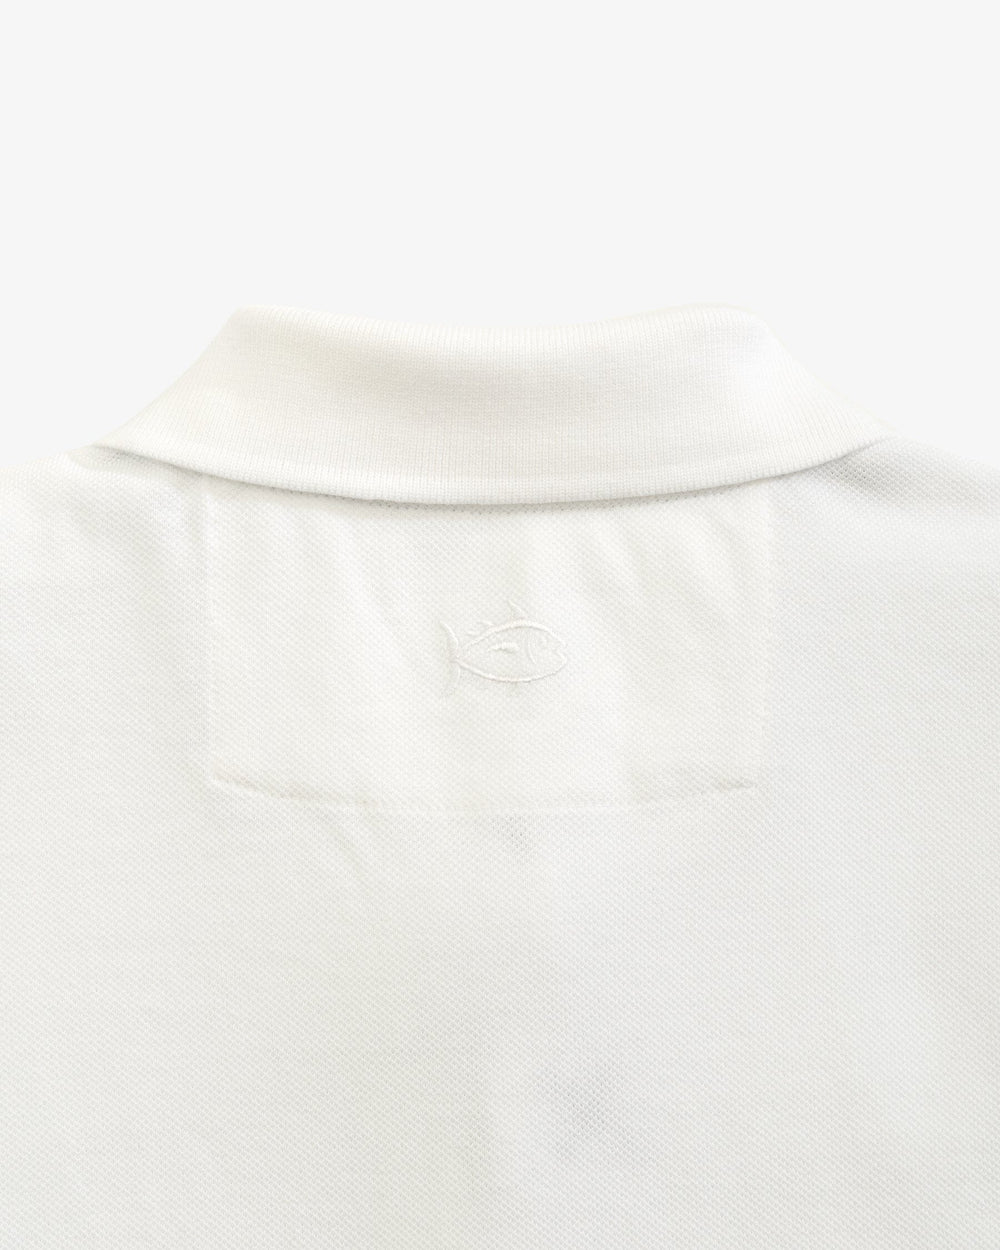 The yoke view of the Auburn Tigers Skipjack Polo by Southern Tide - Classic White